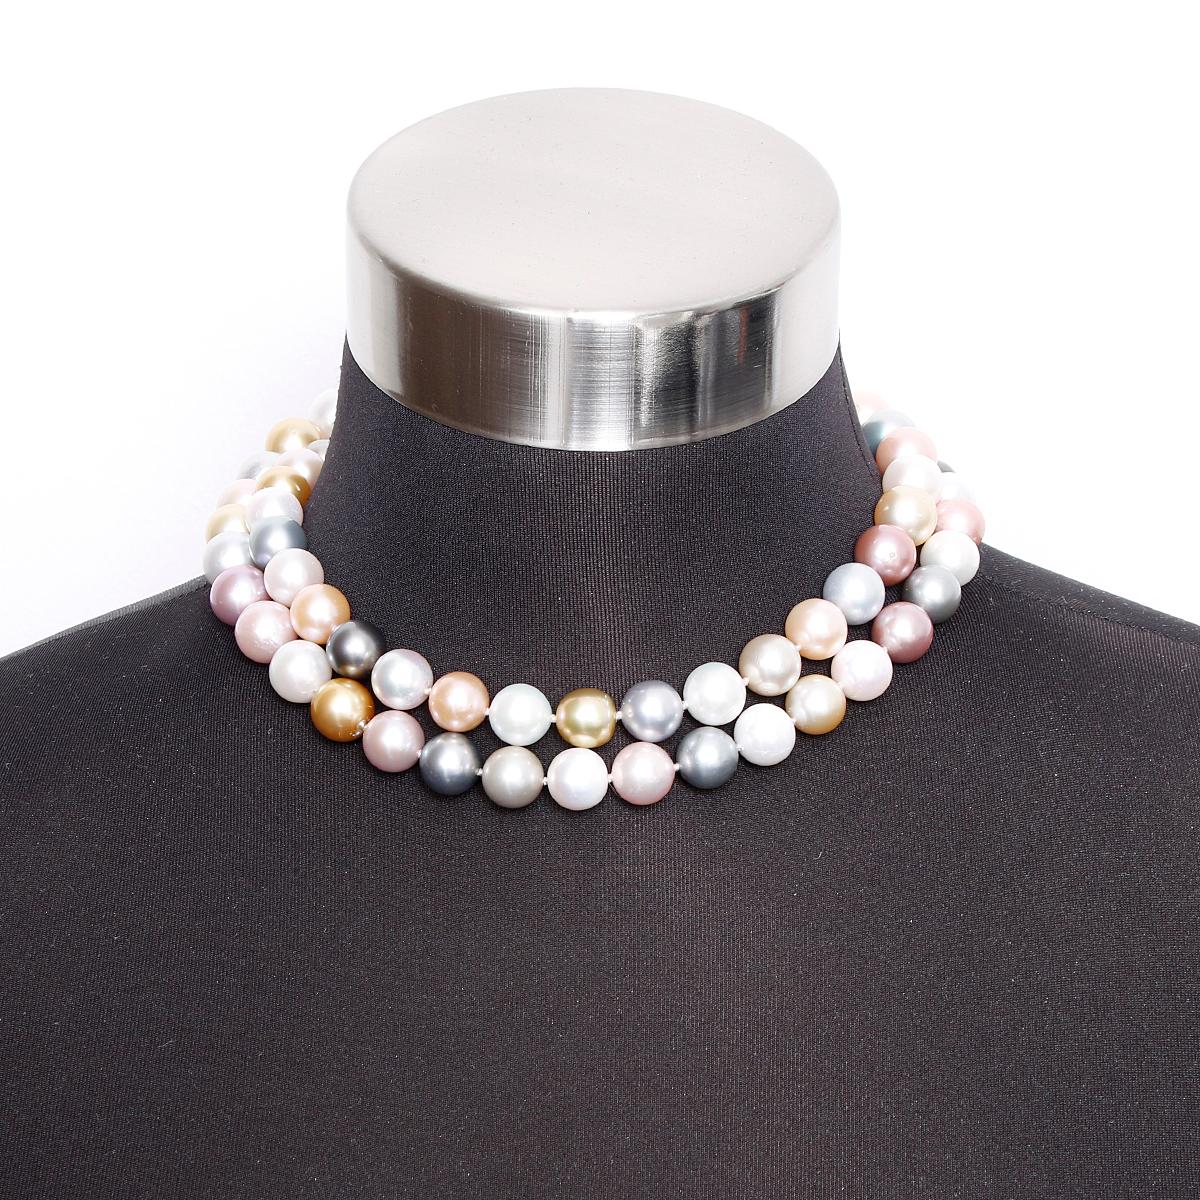 South Sea Multicolor Peal Necklace with Diamond Clasp 35 inches - . This elegant multicolored pearl necklace features natural, unenhanced pearls from all over the world ranging in size from 11.3 to 14.4 mm. The white Pearls are from Australia, pink